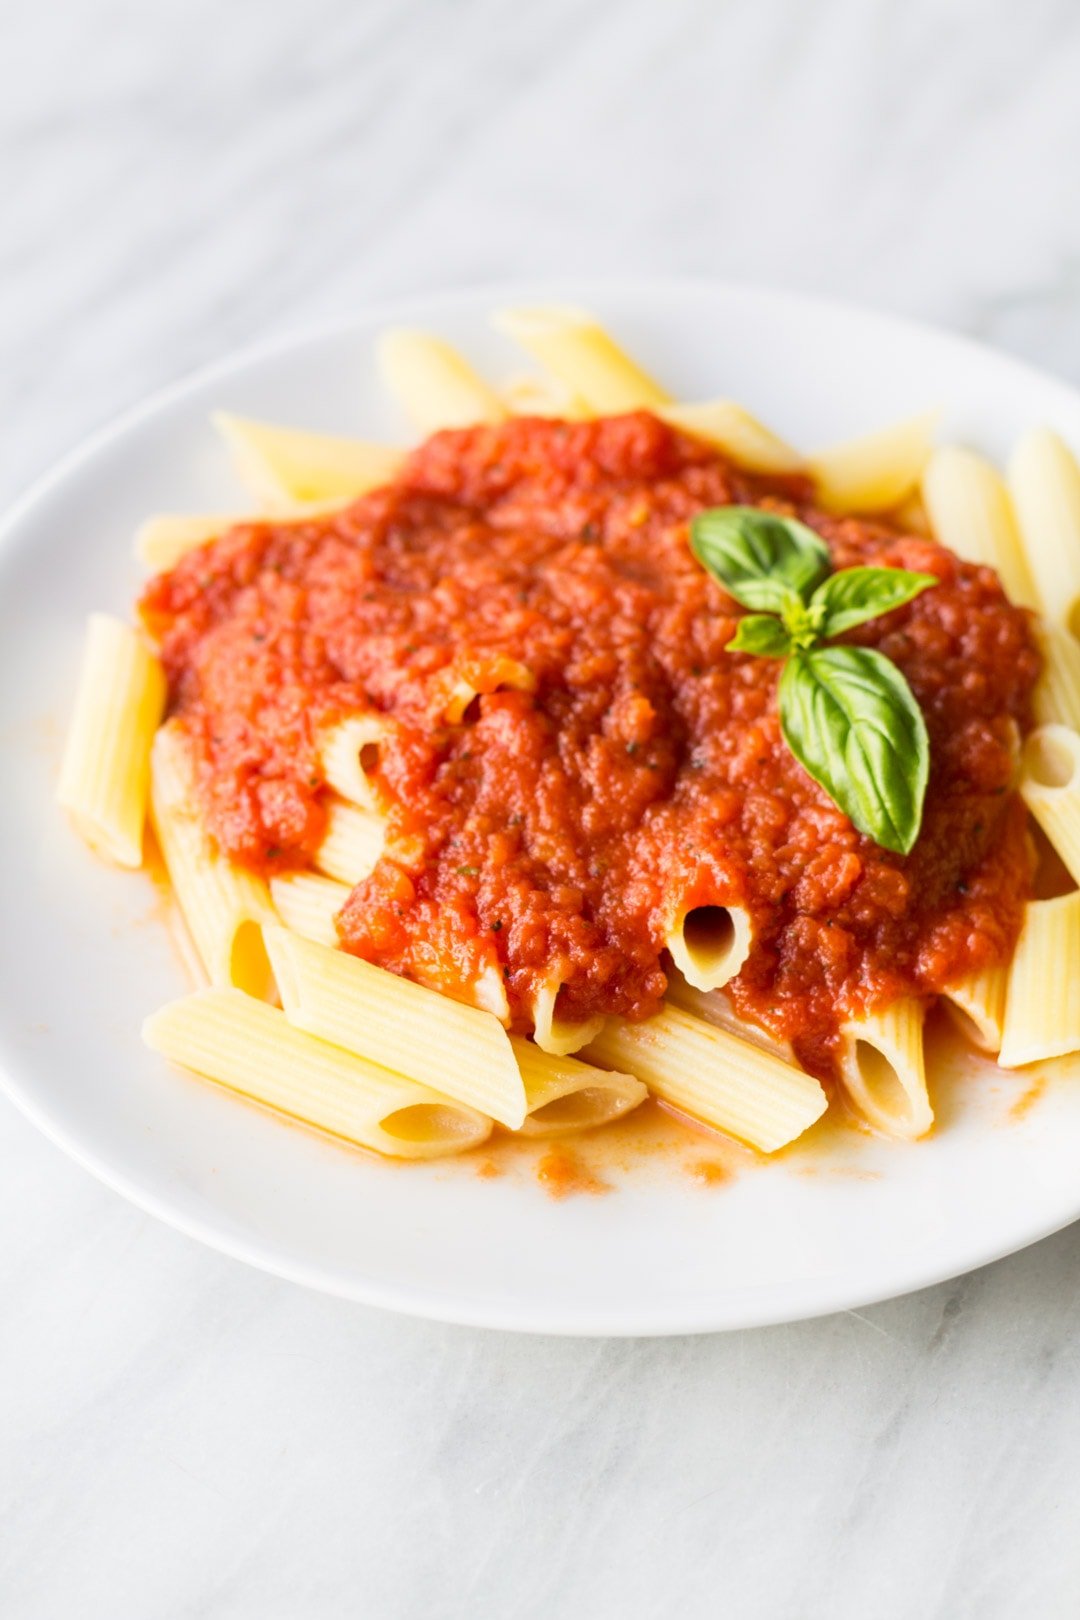 Plate with low FODMAP pasta sauce over gluten free penne